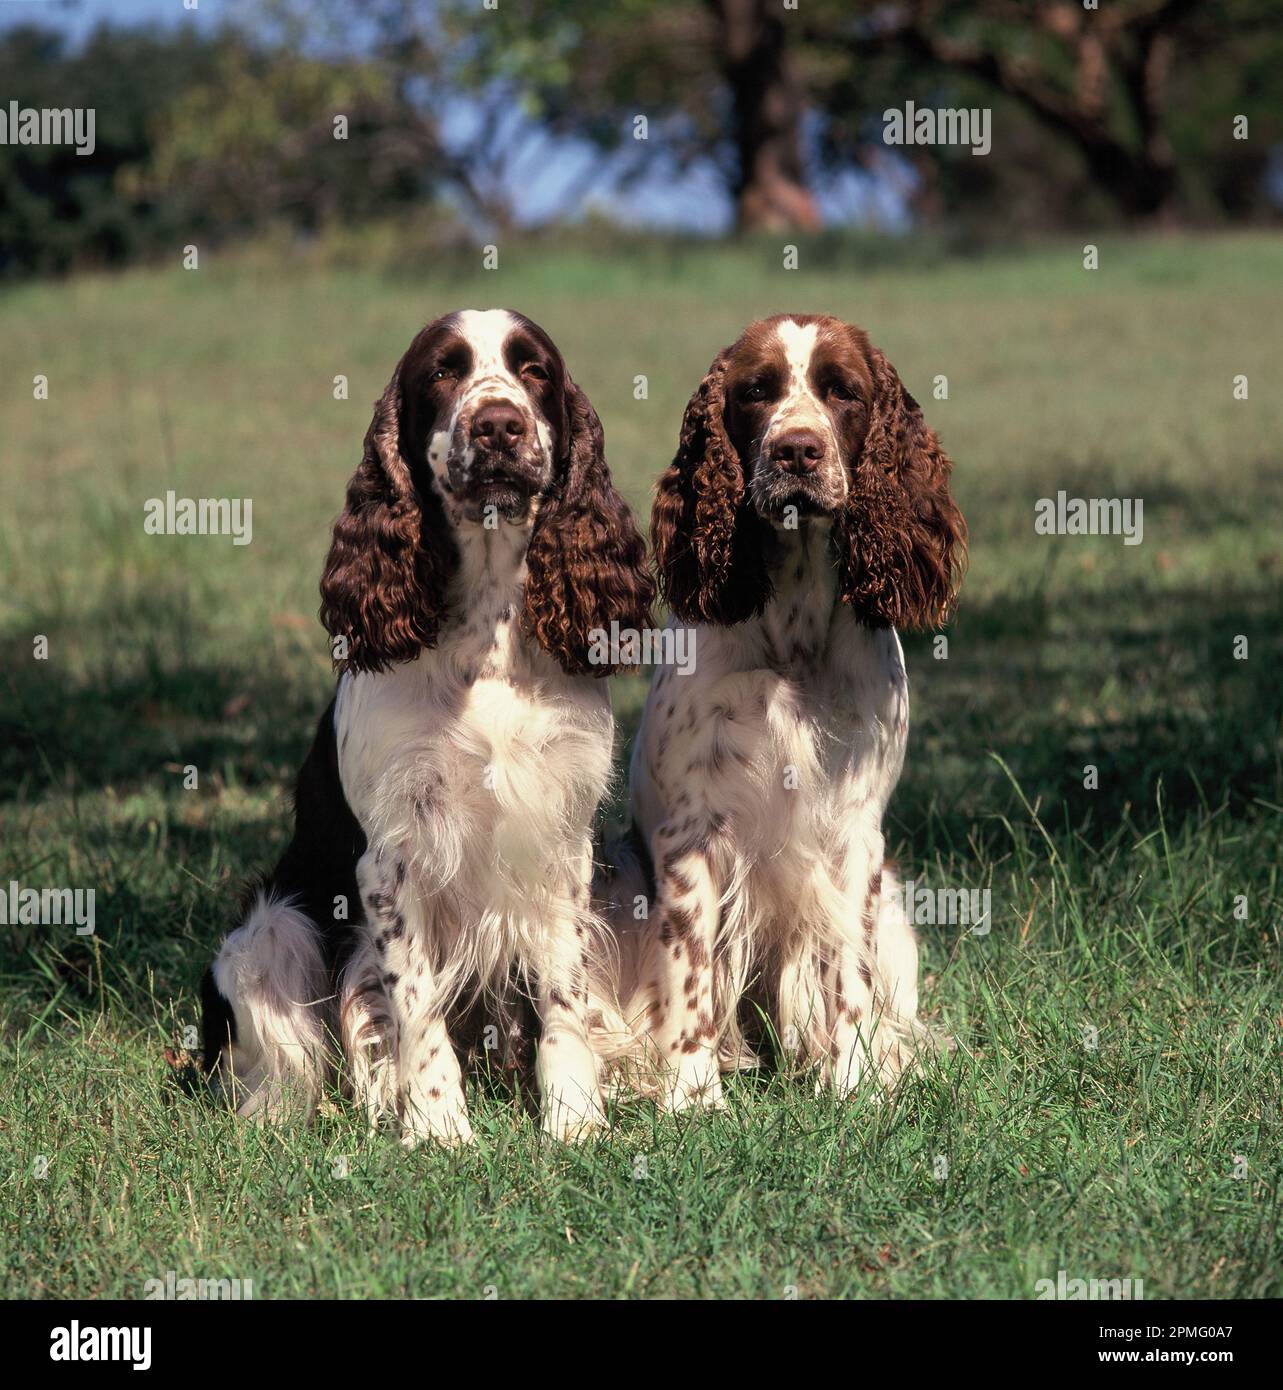 Pets. Adult Dogs. Two Springer Spaniels outdoors. Stock Photo